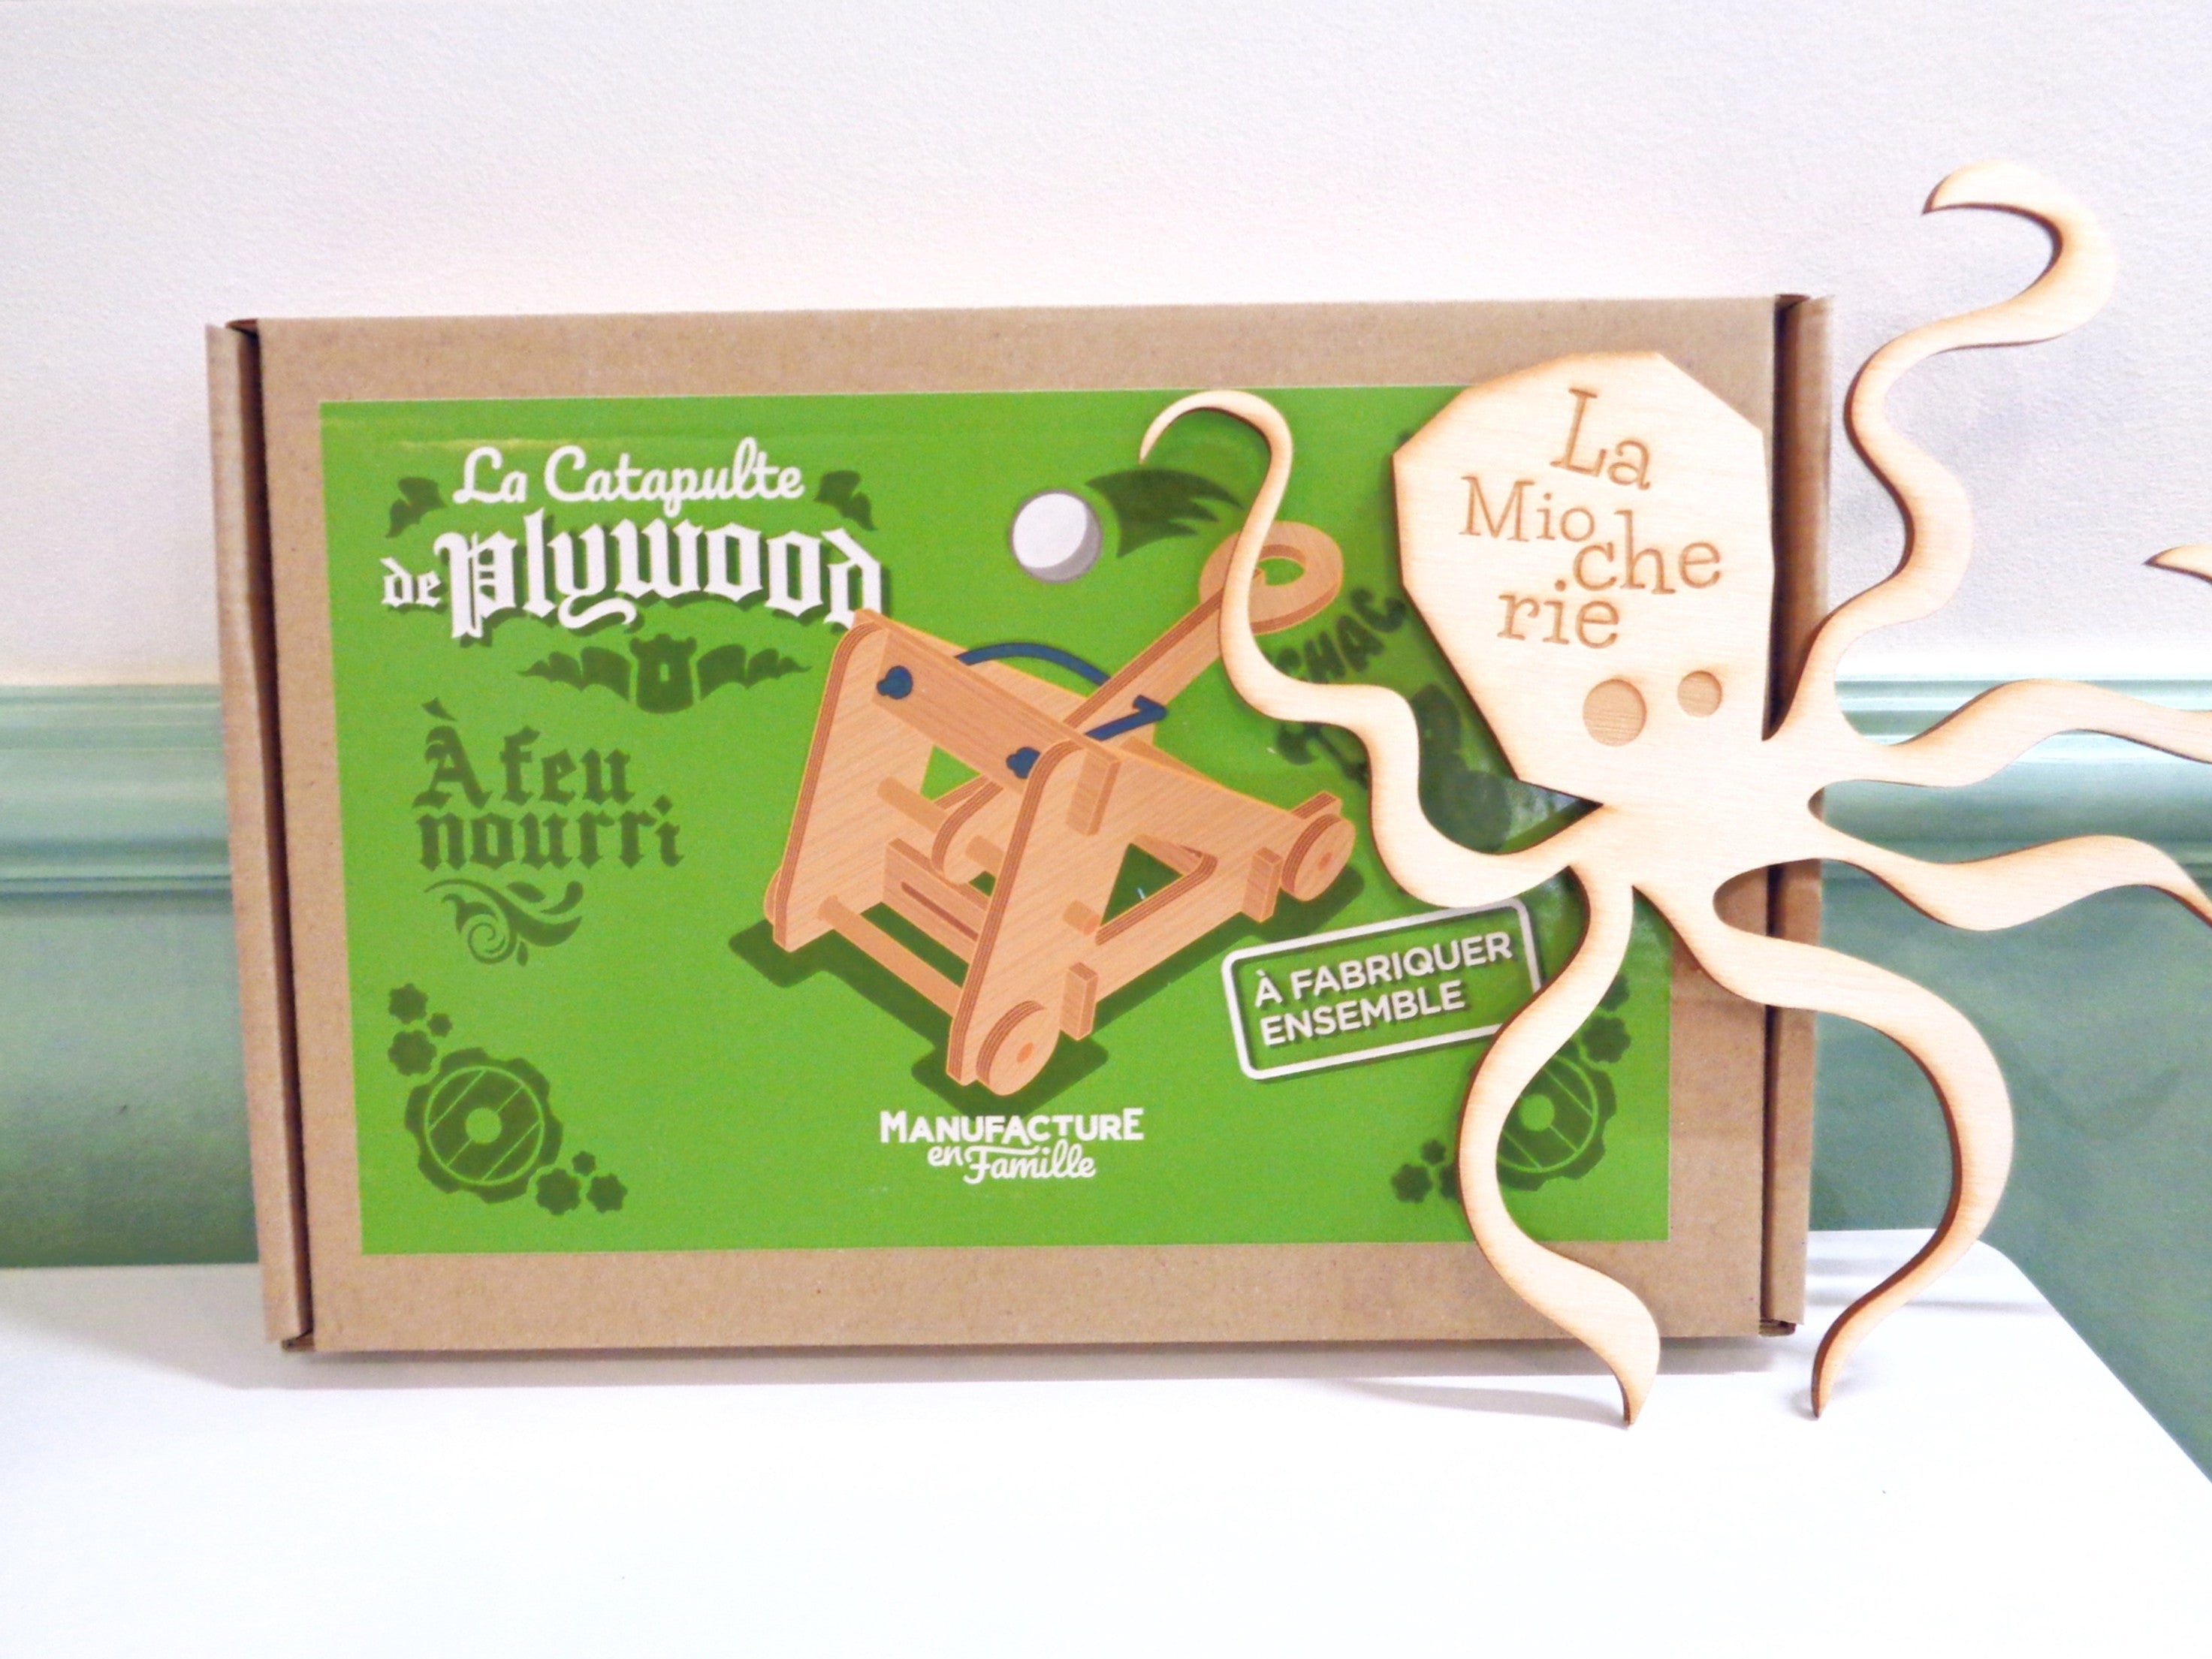 Plywood catapult kit - Made in France - Family manufacturing